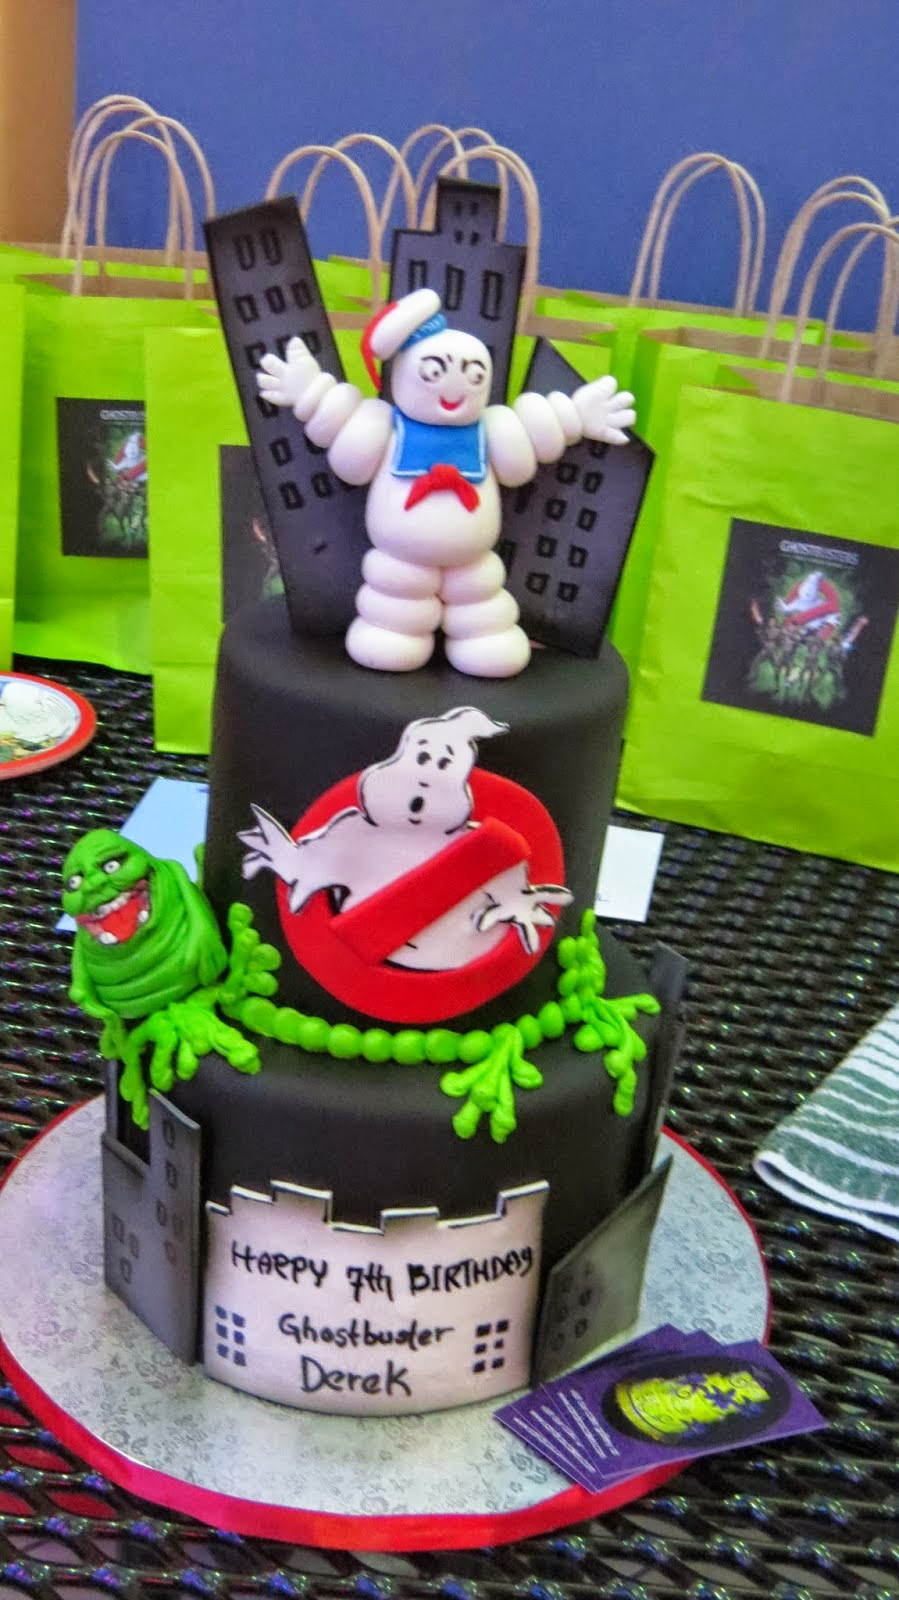 Ghostbusters Birthday Party
 Ghostbuster Theme Birthday Party